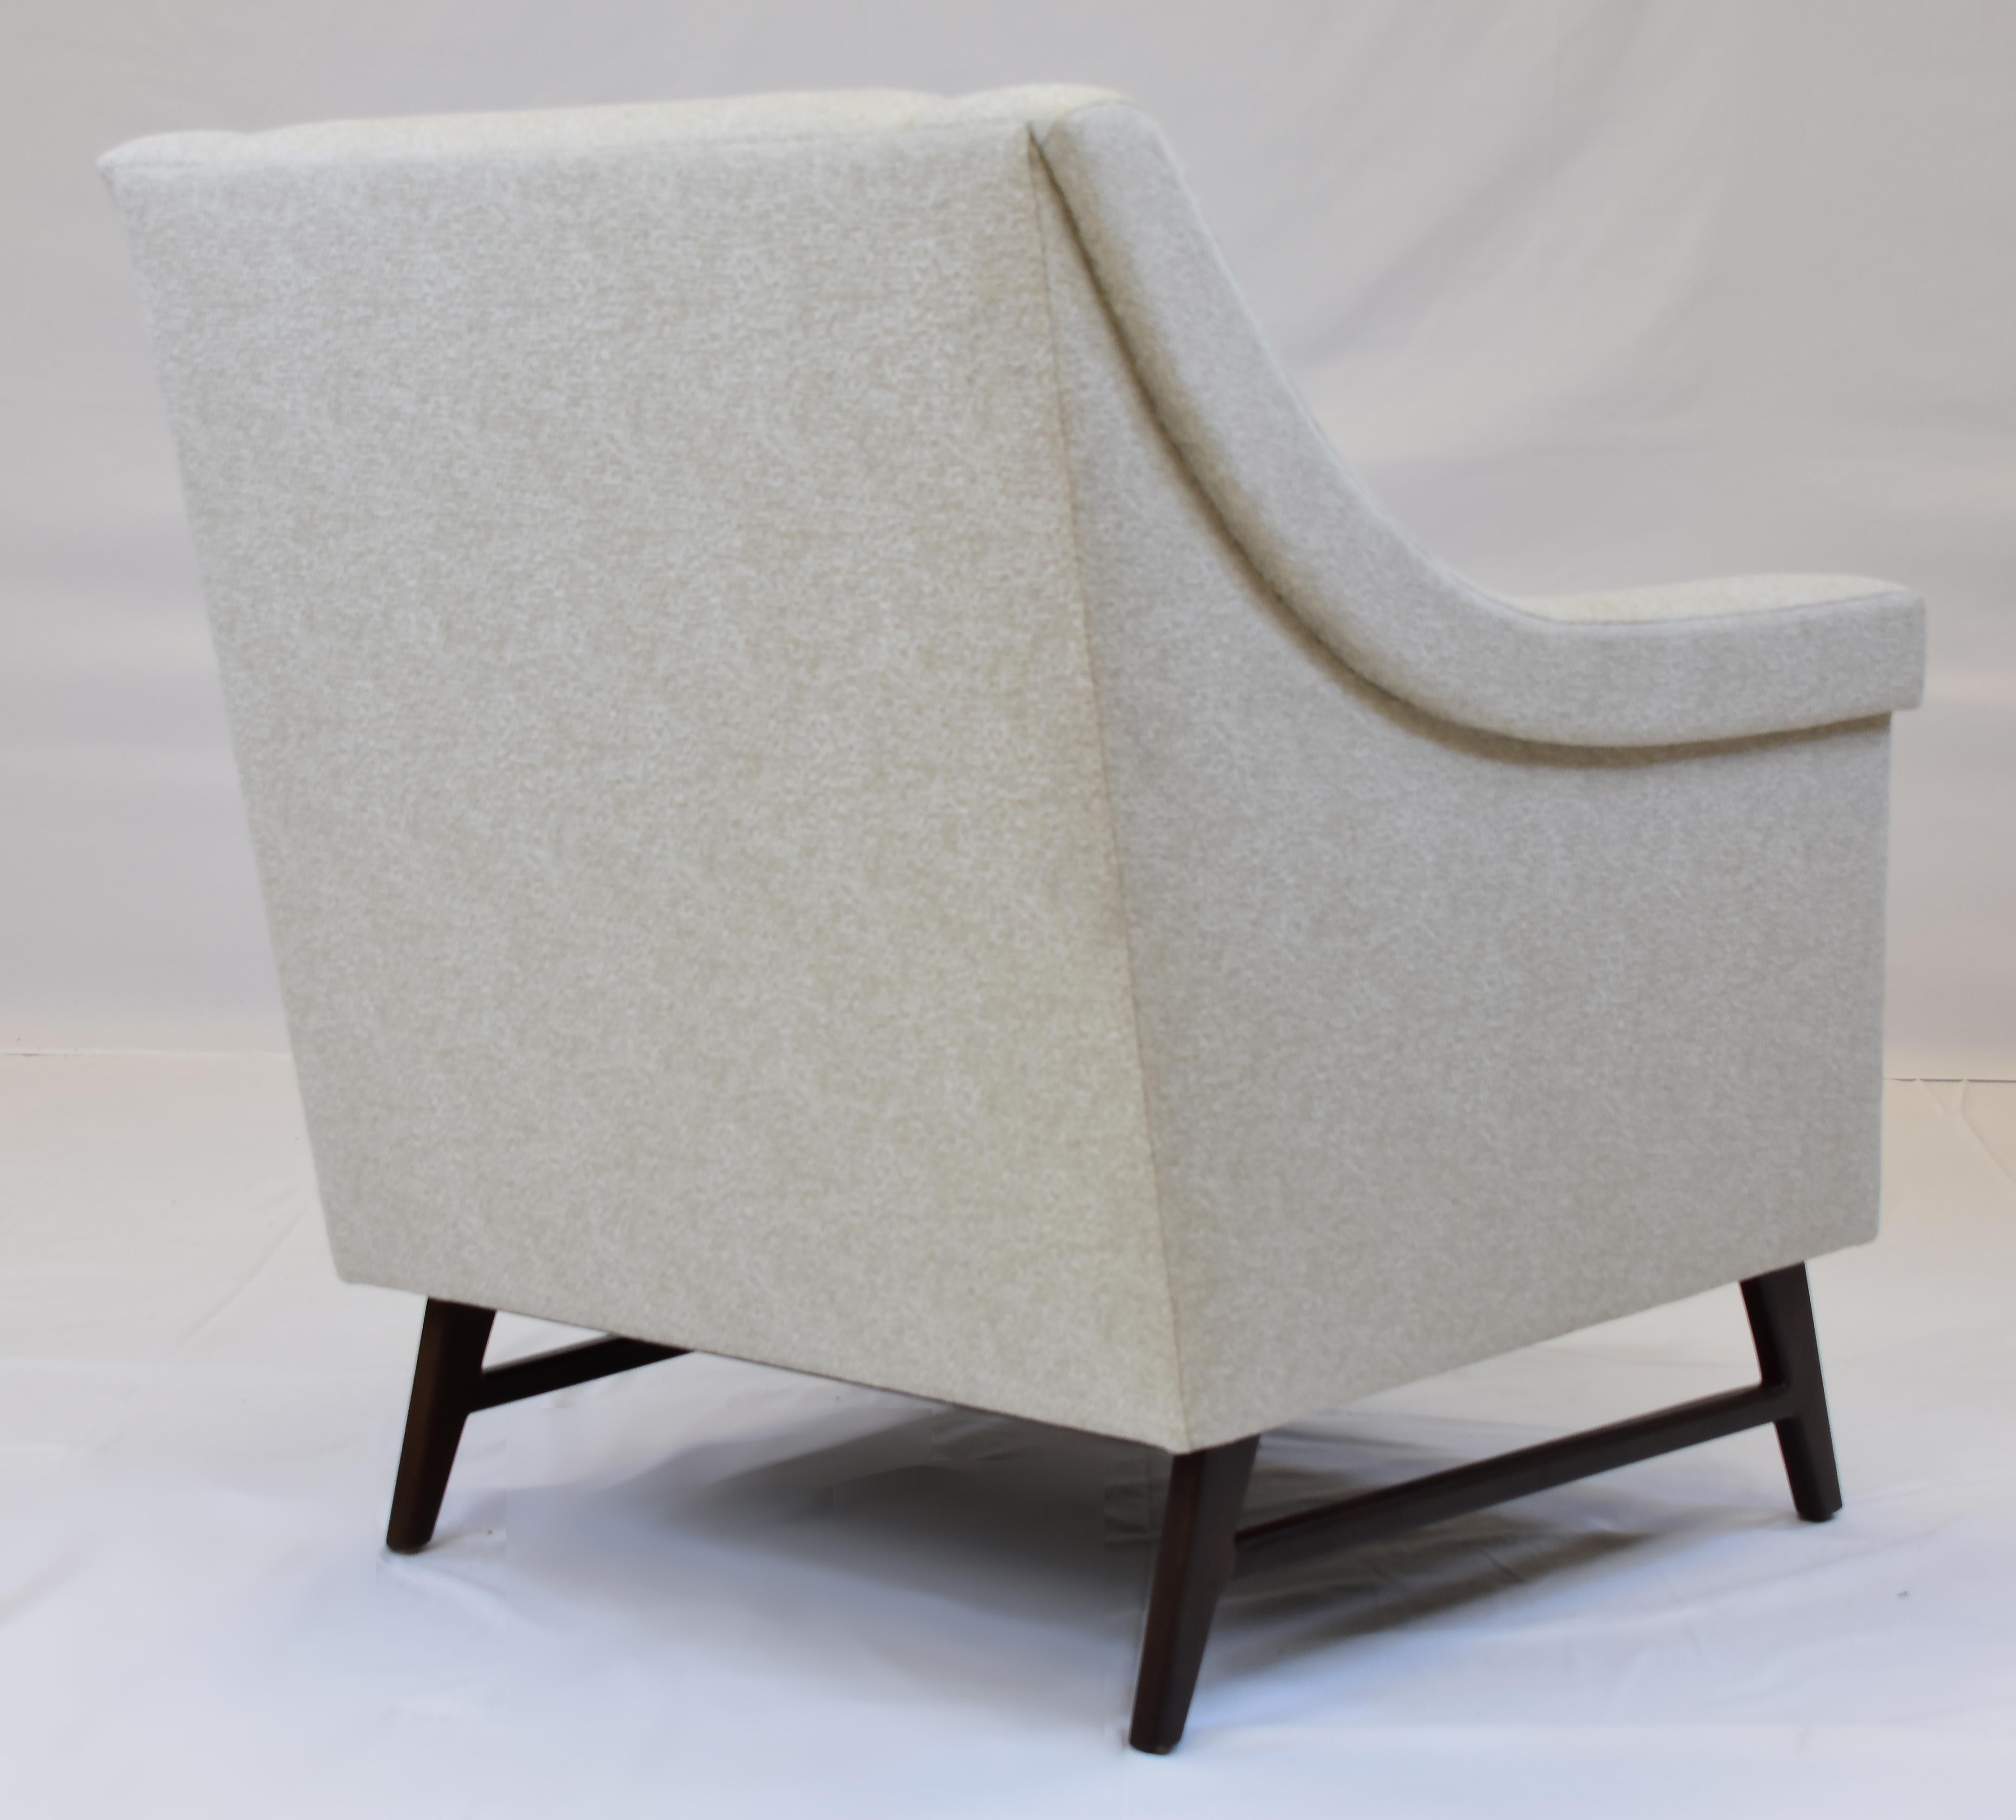 Contemporary Le Jeune Upholstery Hansen Lounge Chair Showroom Model For Sale